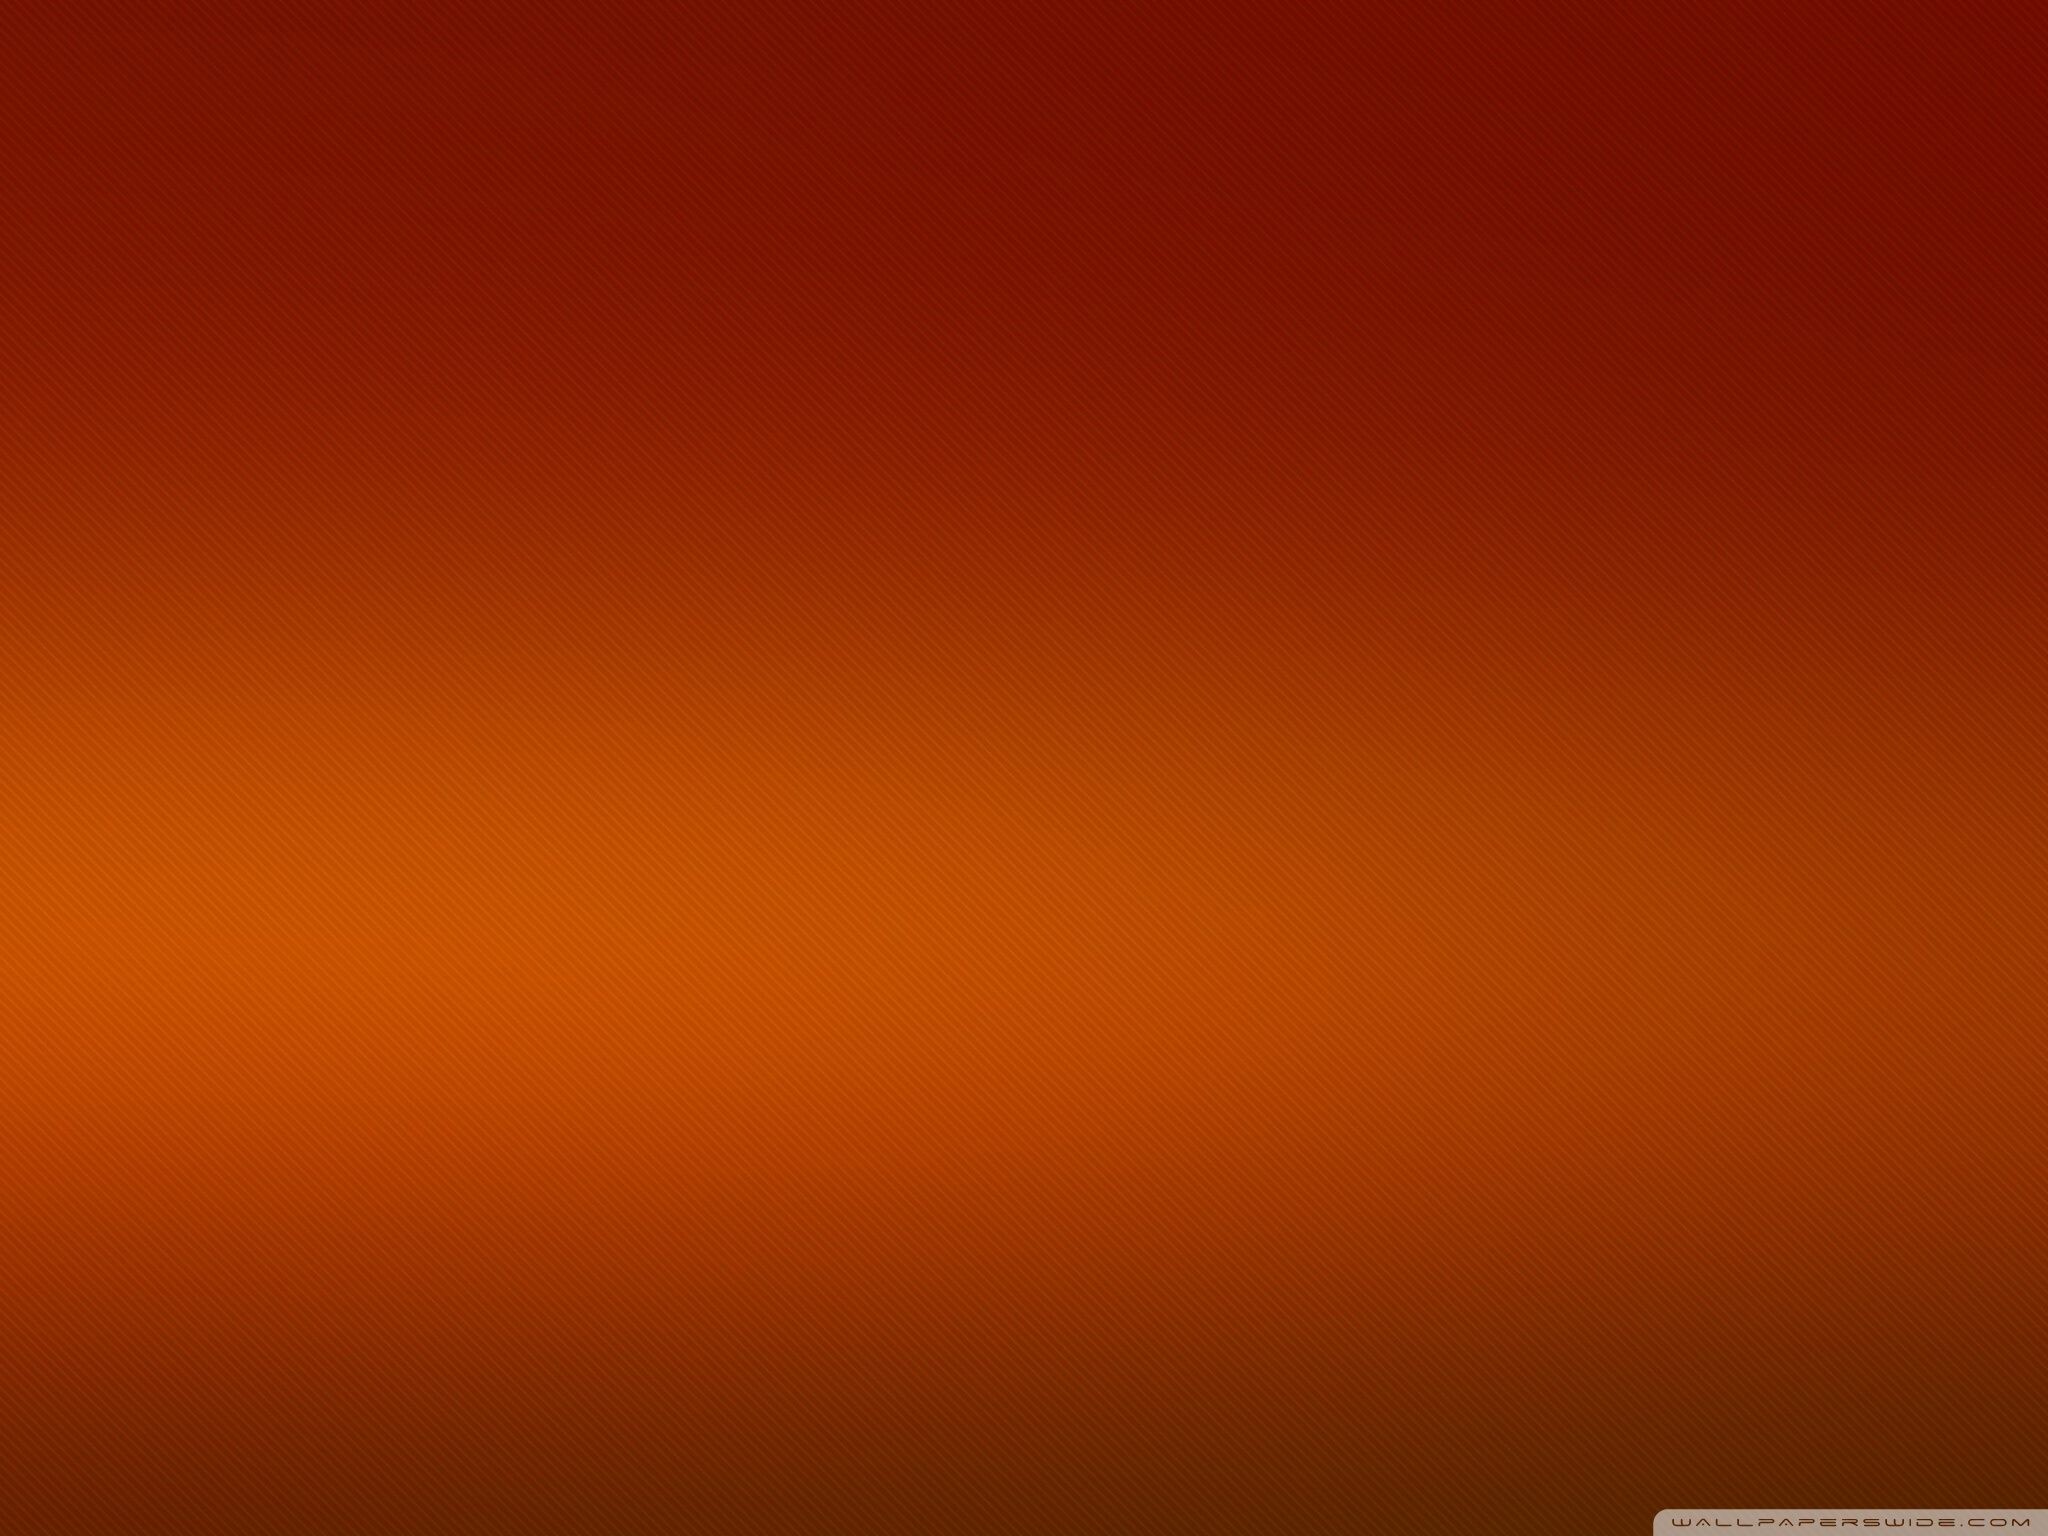 Orange Desktop Wallpaper: HD, 4K, 5K for PC and Mobile. Download free image for iPhone, Android